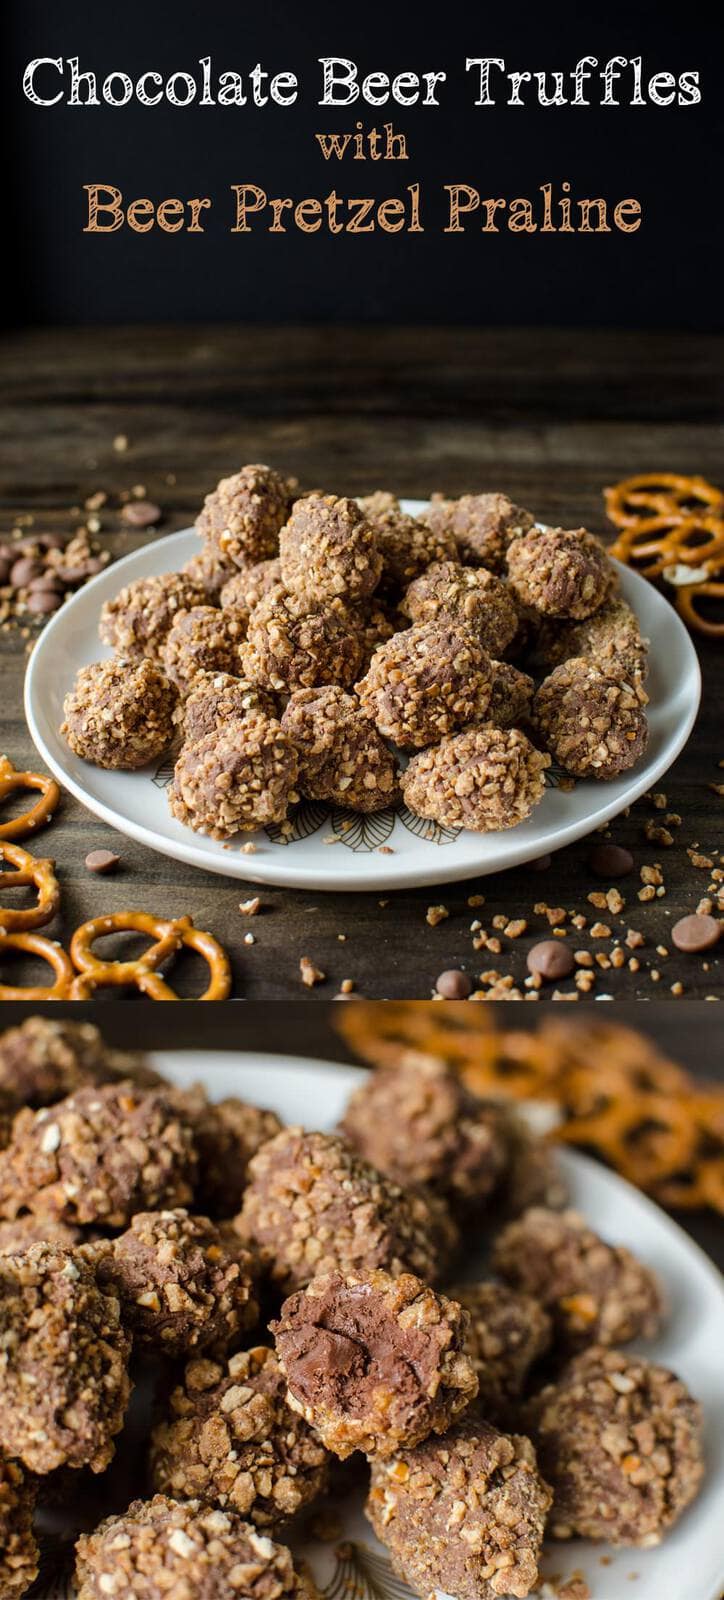 Chocolate Beer truffles with Beer Pretzel Praline - Perfect bite sized treats! Rich Chocolate truffles studded with Beer infused Pretzel Praline pieces! Chocolate, Beer, Pretzels and Caramel in one bite!